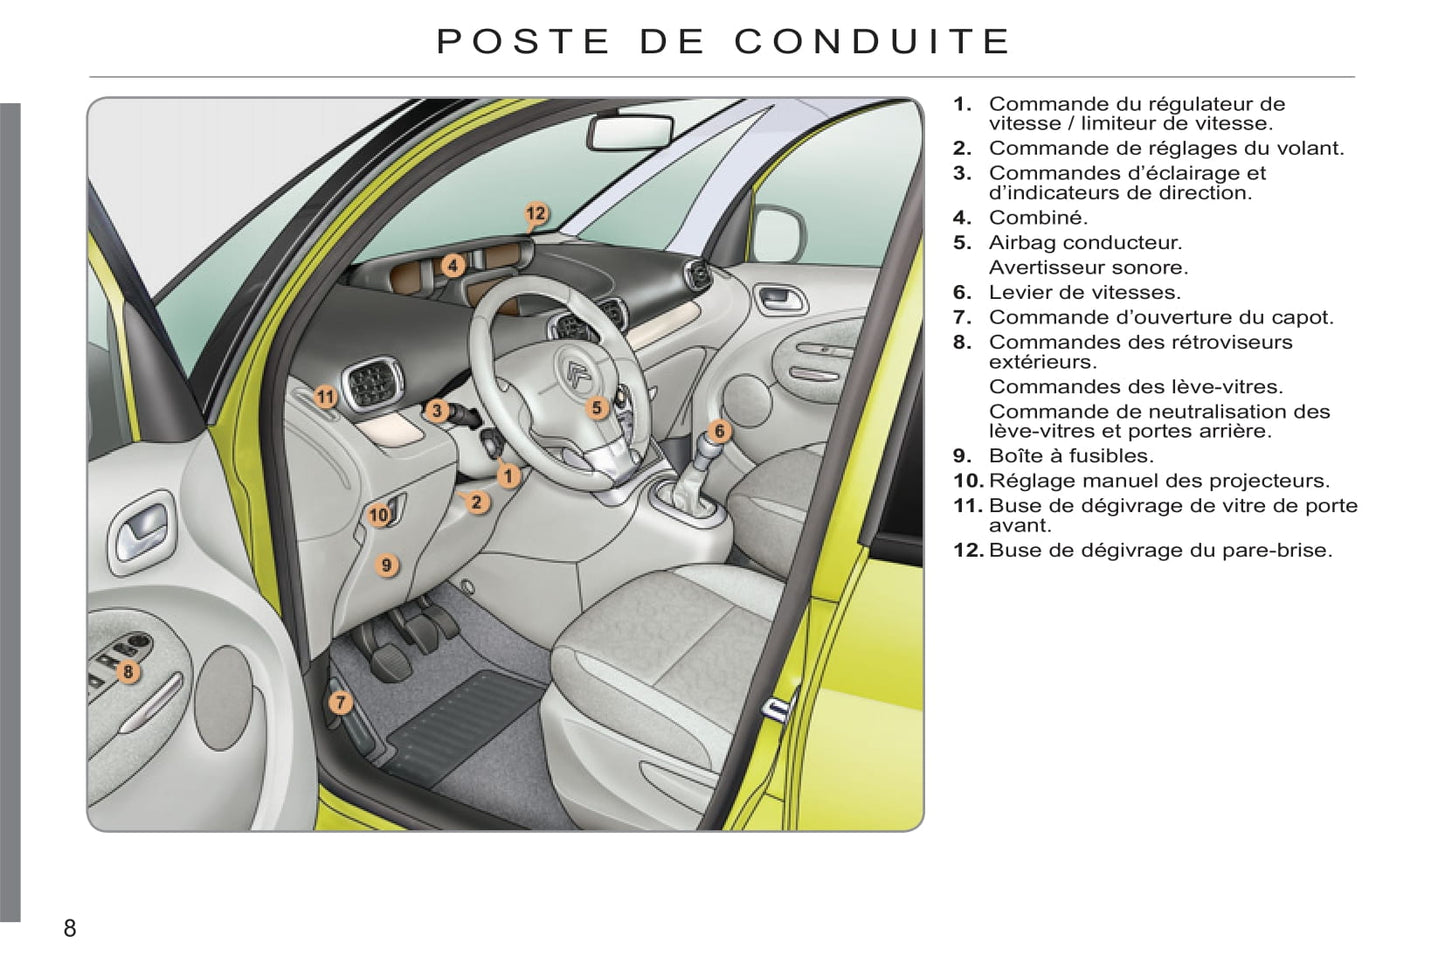 2011-2012 Citroën C3 Picasso Owner's Manual | French